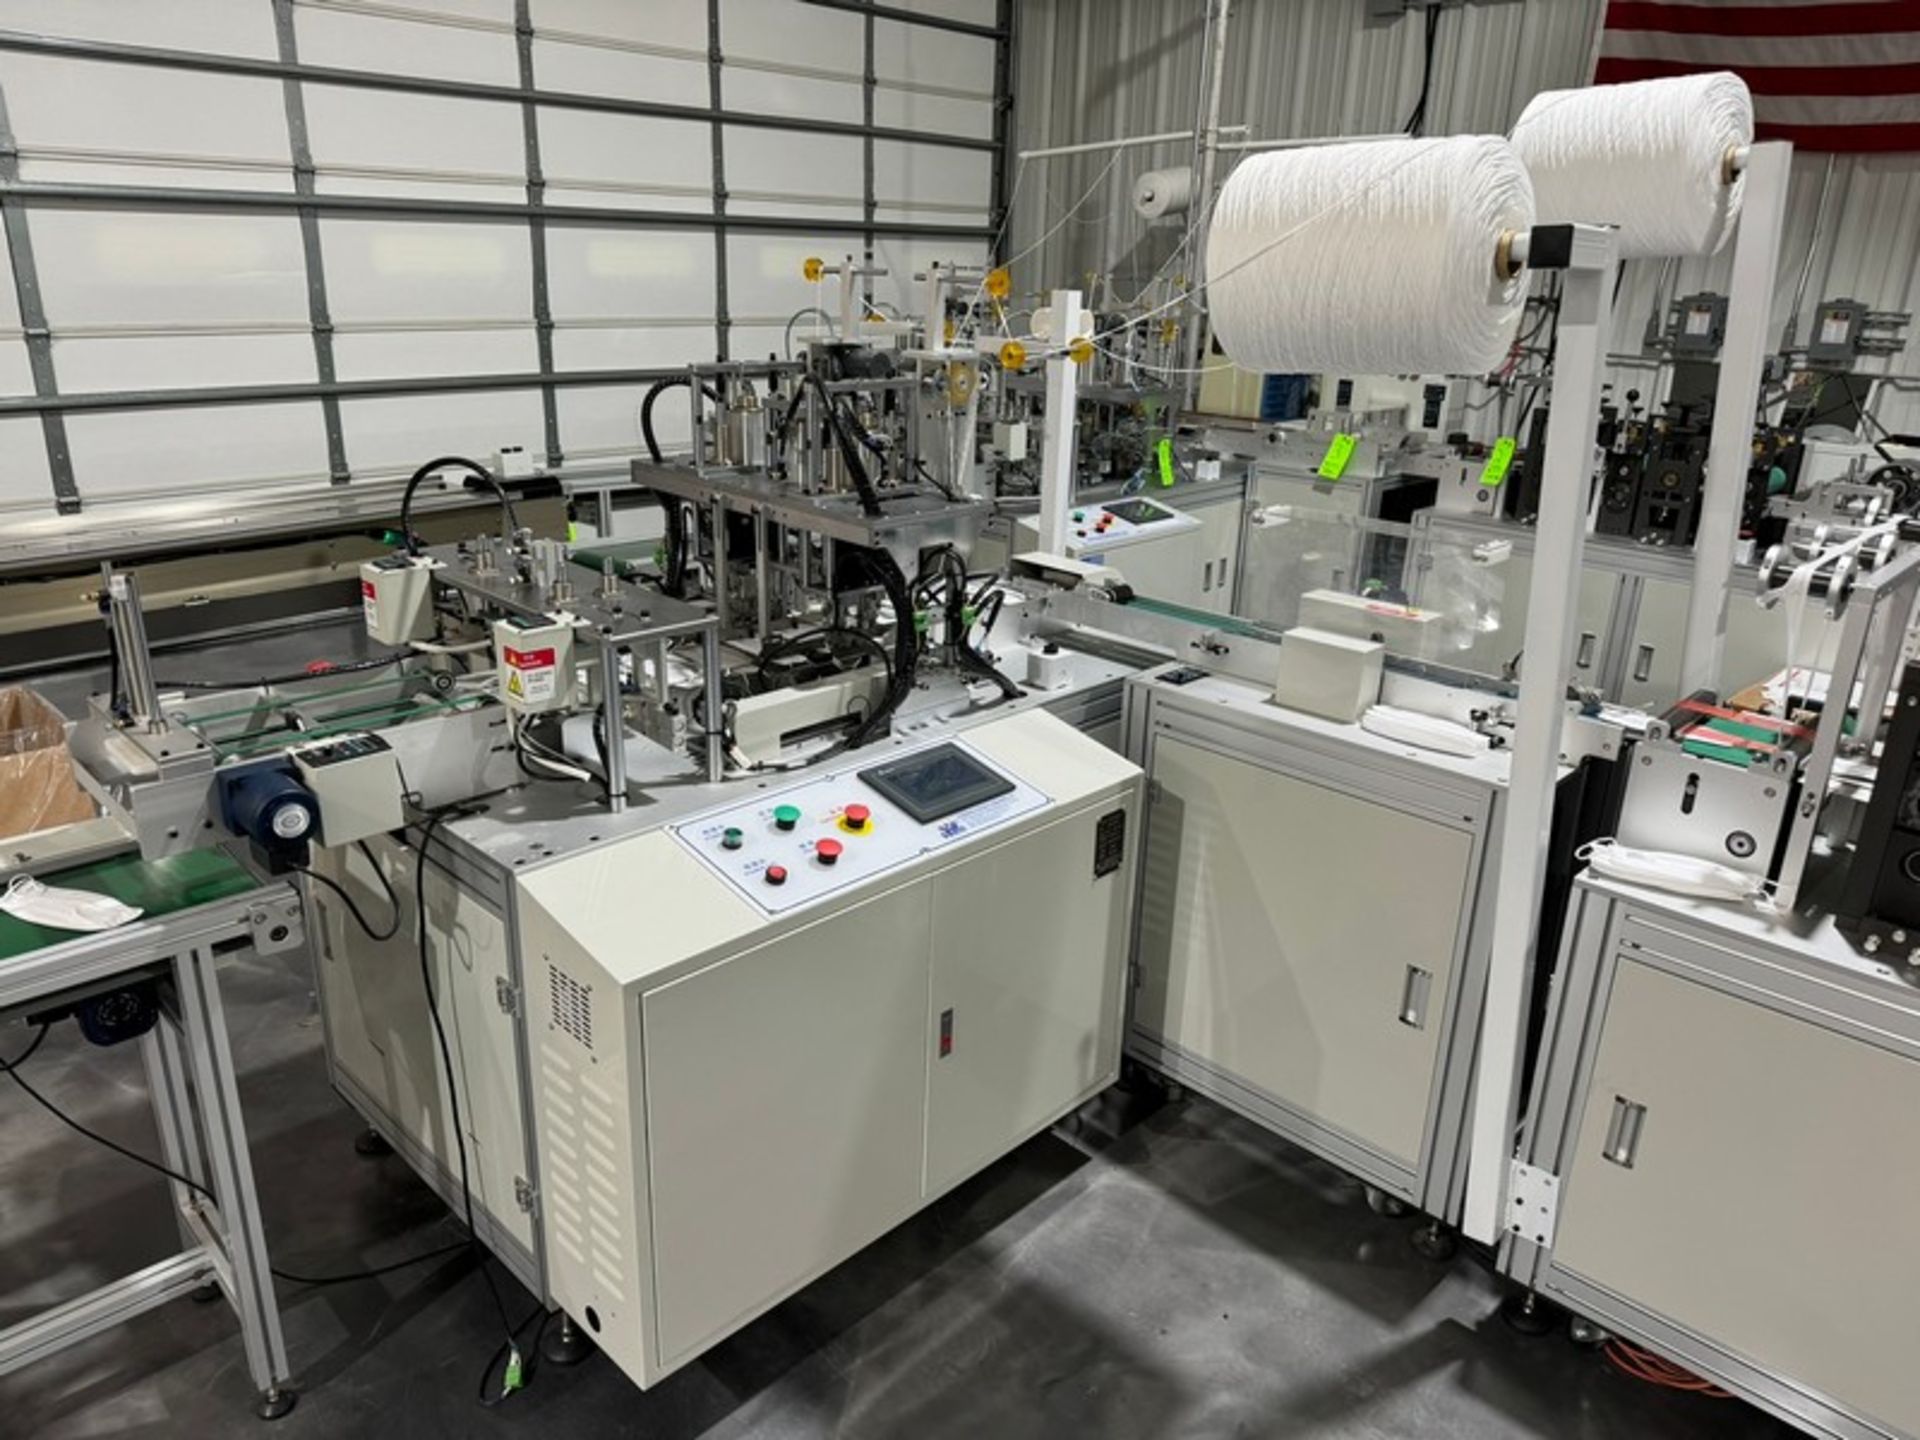 2022 KYD Automatic 6,000 Units Per Hour Mask Manufacturing Line, Includes Unwinding Station, Rolling - Image 5 of 30